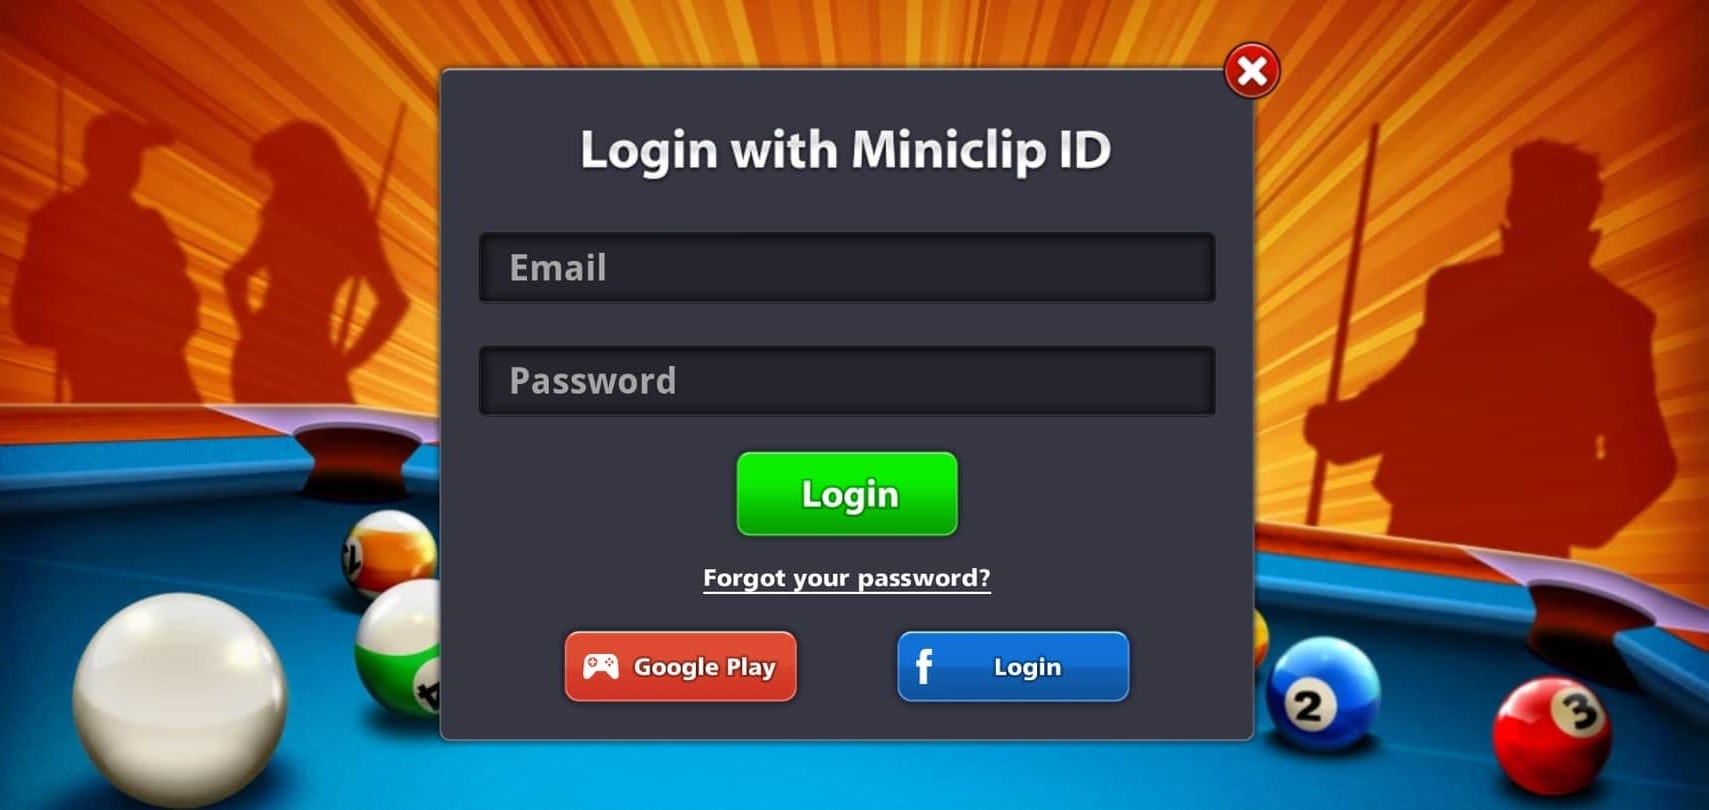 Creating a Miniclip ID using our email address is longer possible